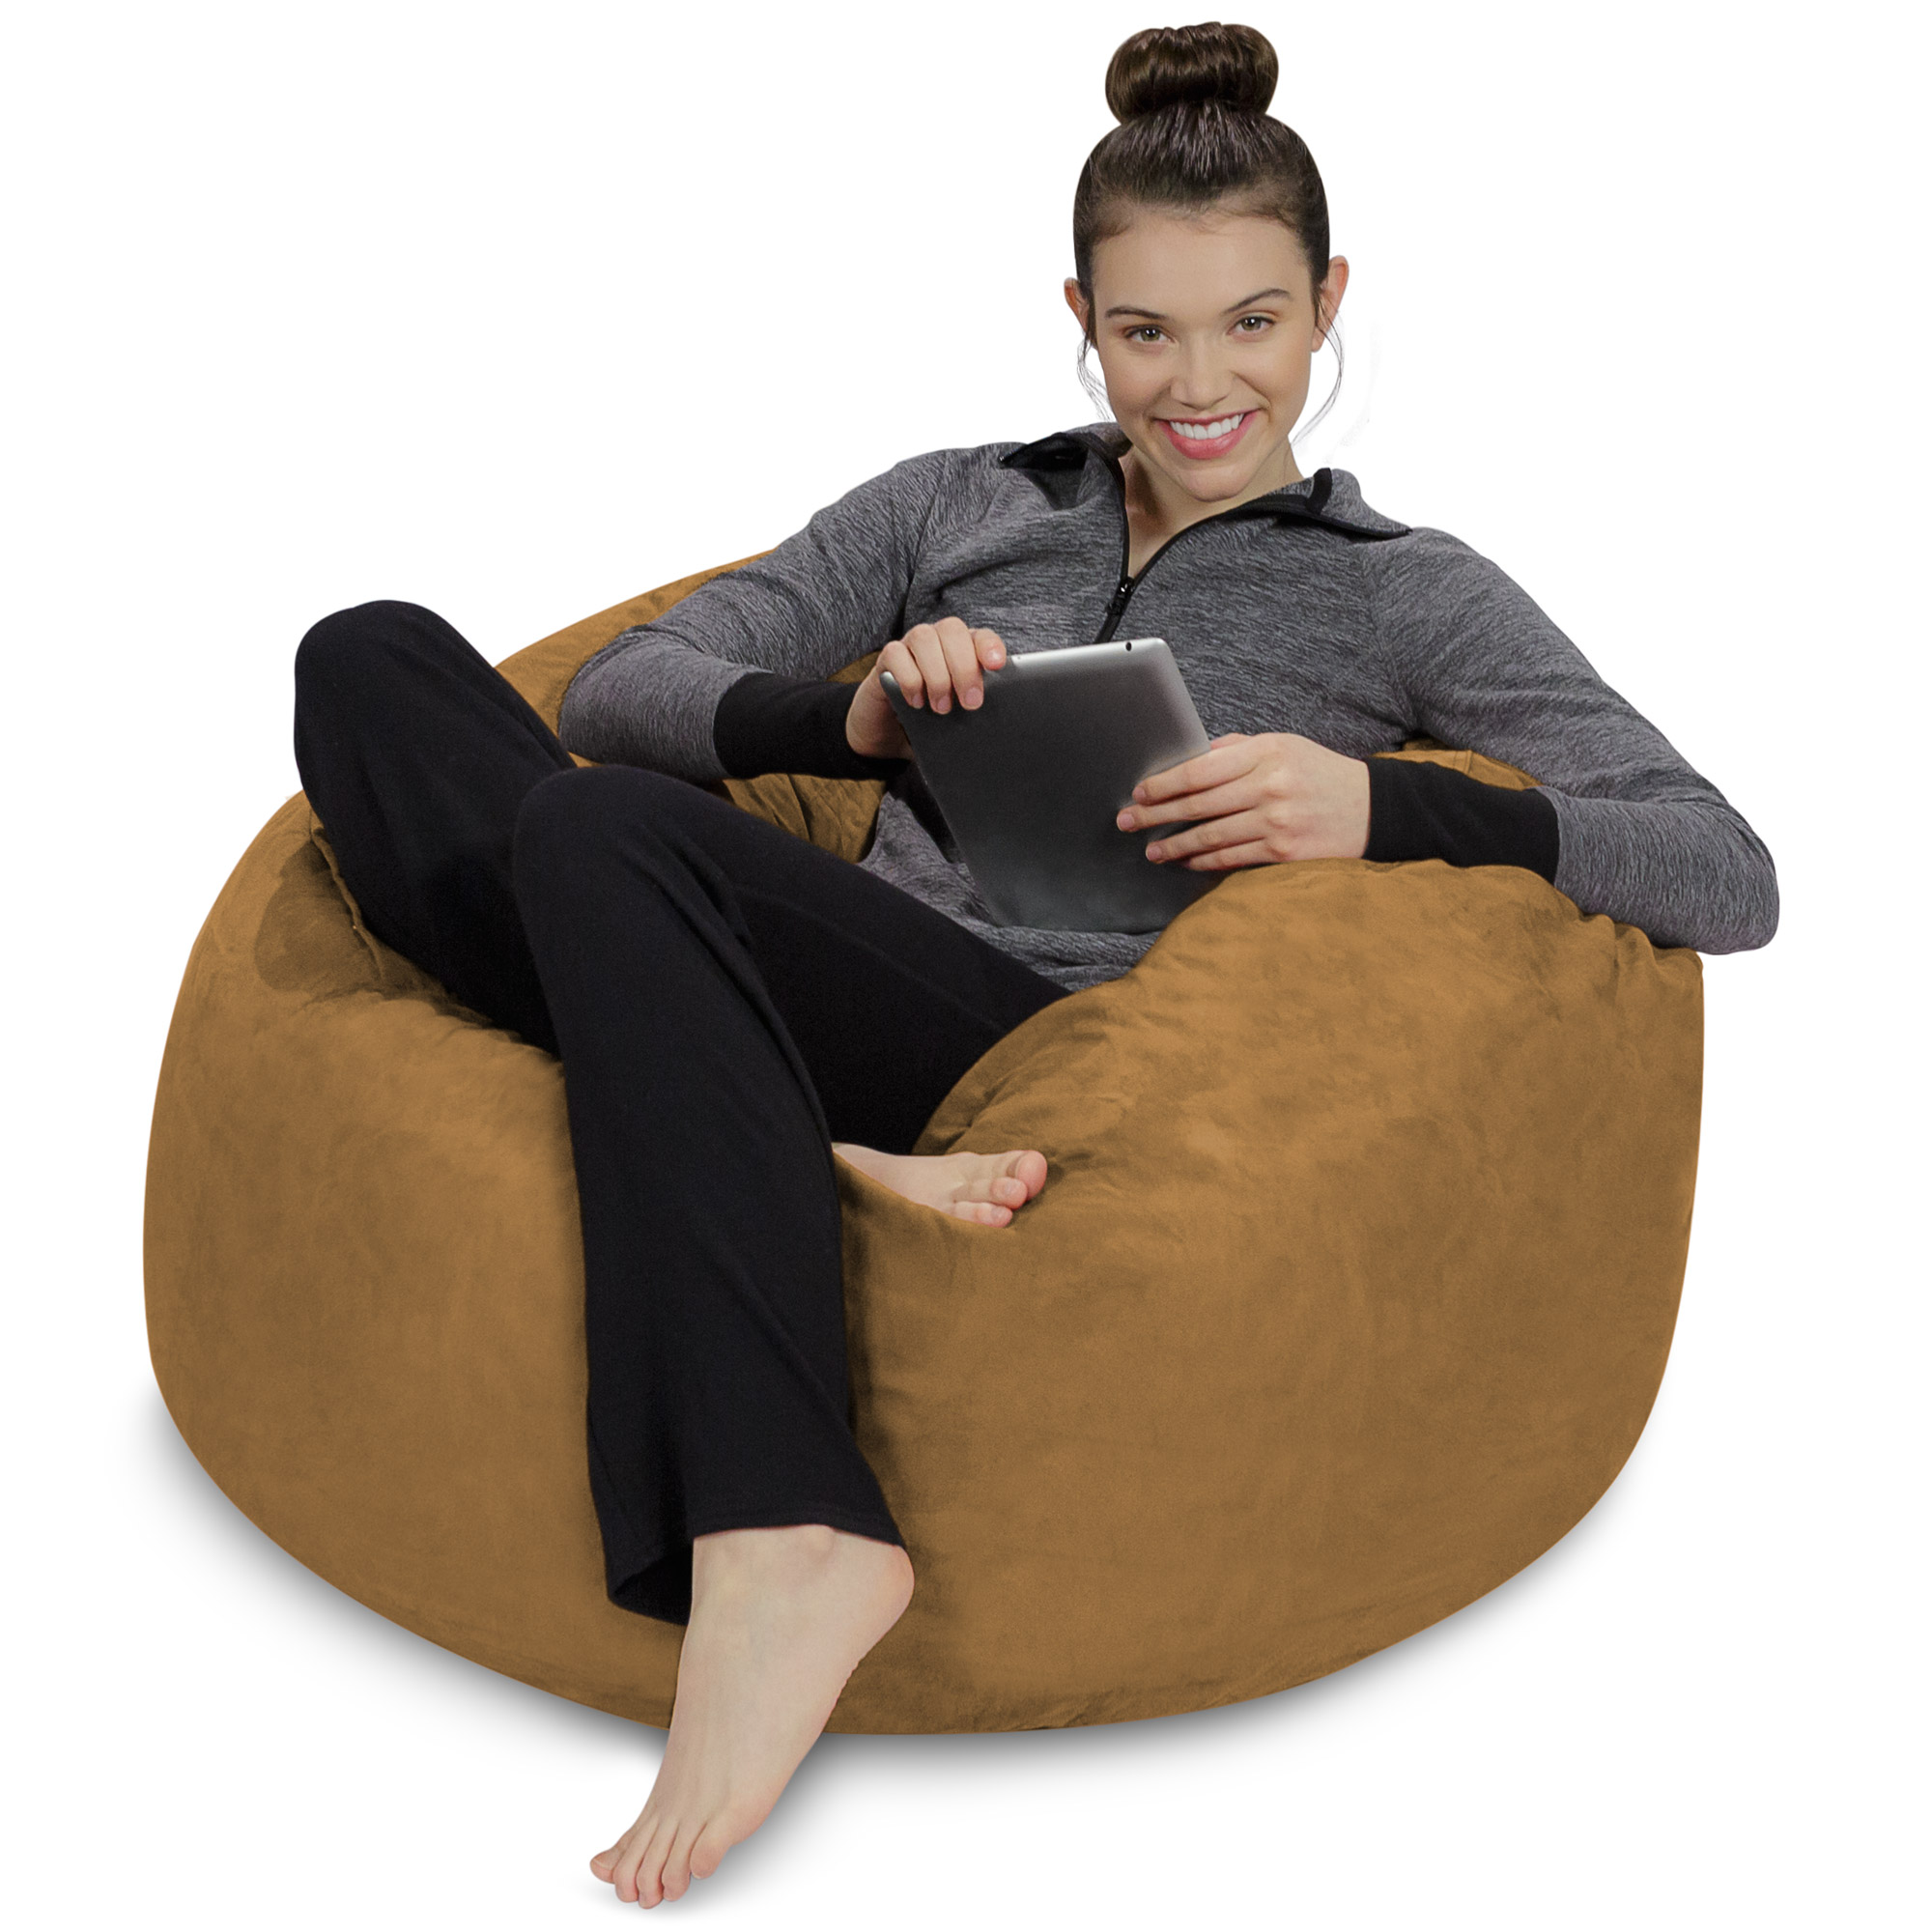 Sofa Sack Bean Bag Chair, Memory Foam Lounger with Microsuede Cover, Kids, 3 ft, Cocoa - image 4 of 5